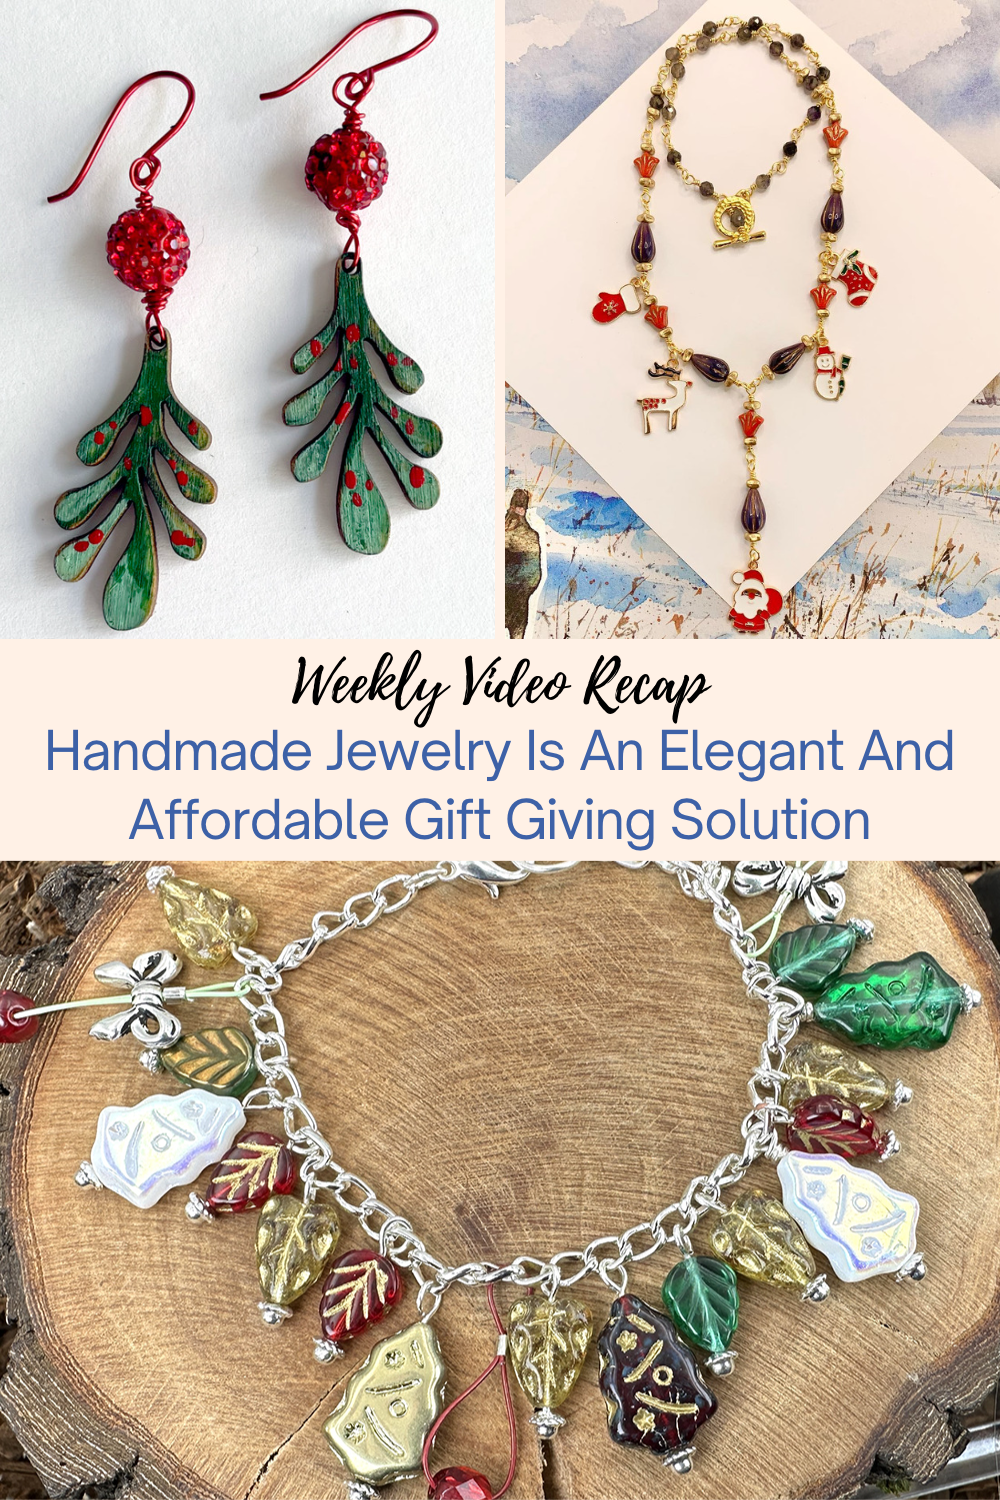 Handmade Jewelry Is An Elegant And Affordable Gift Giving Solution Collage